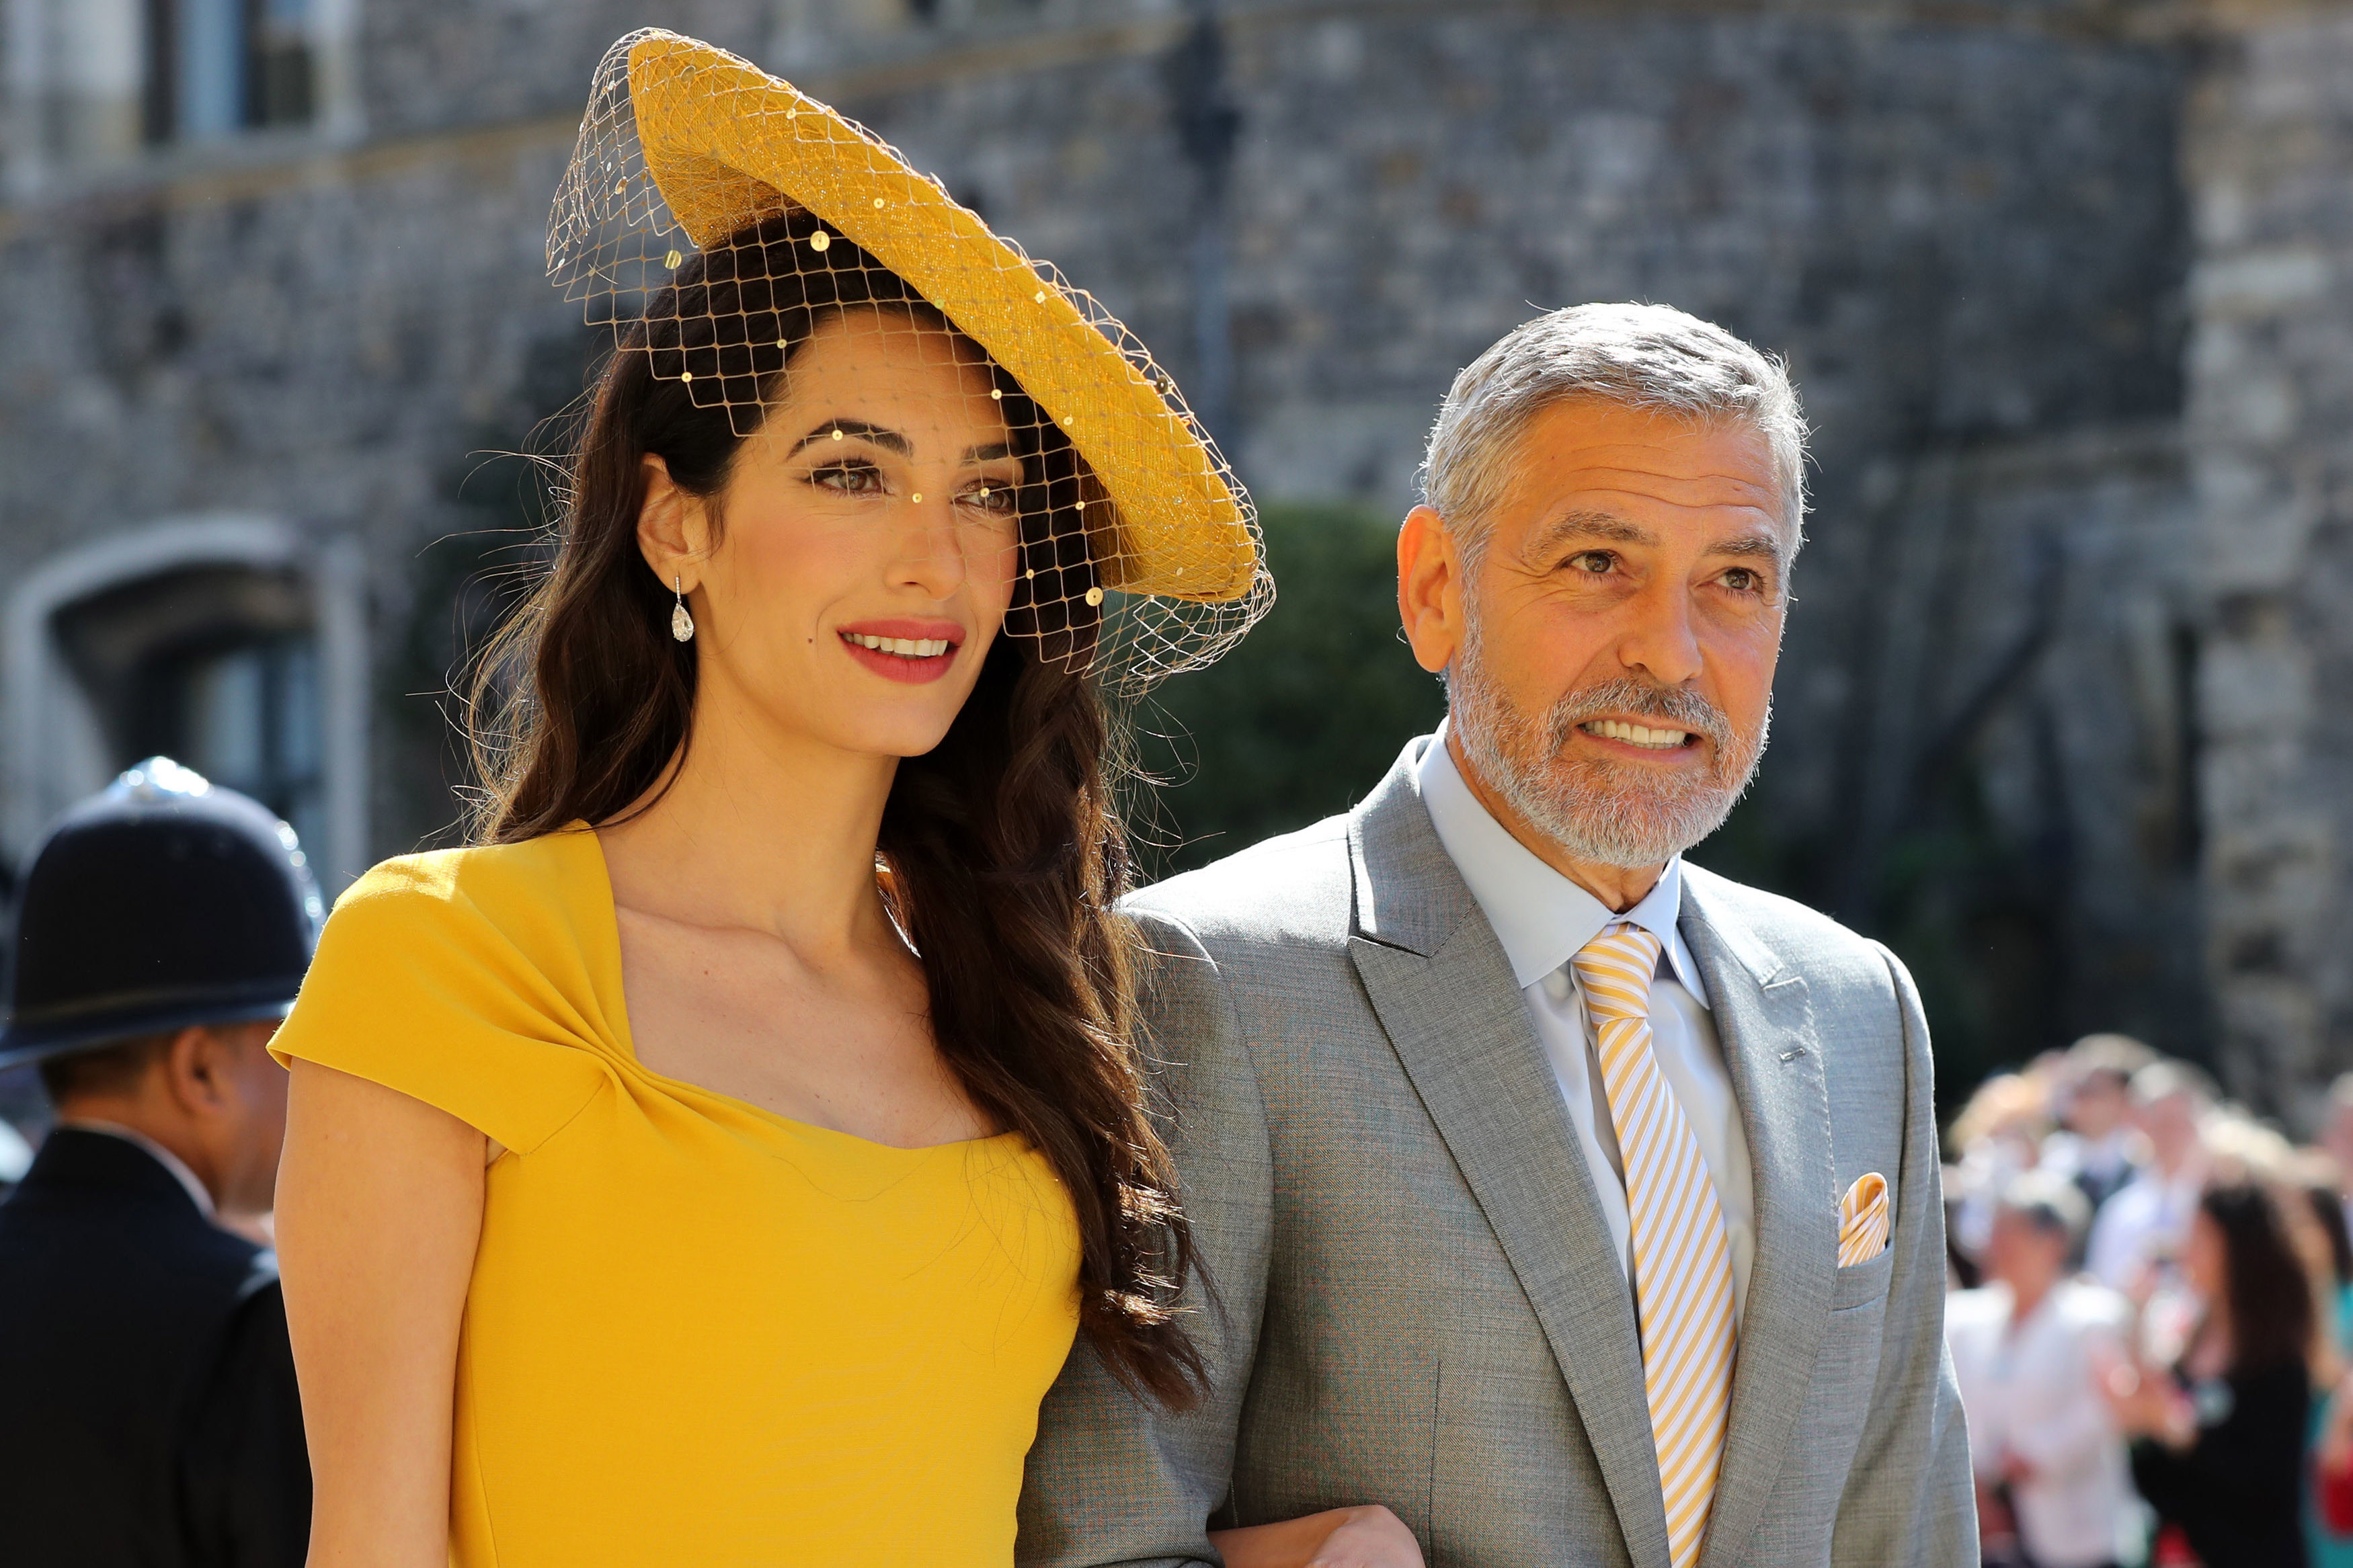 Amal and George Clooney arriving at St George's Chapel for the wedding of Prince Harry to Meghan Markle